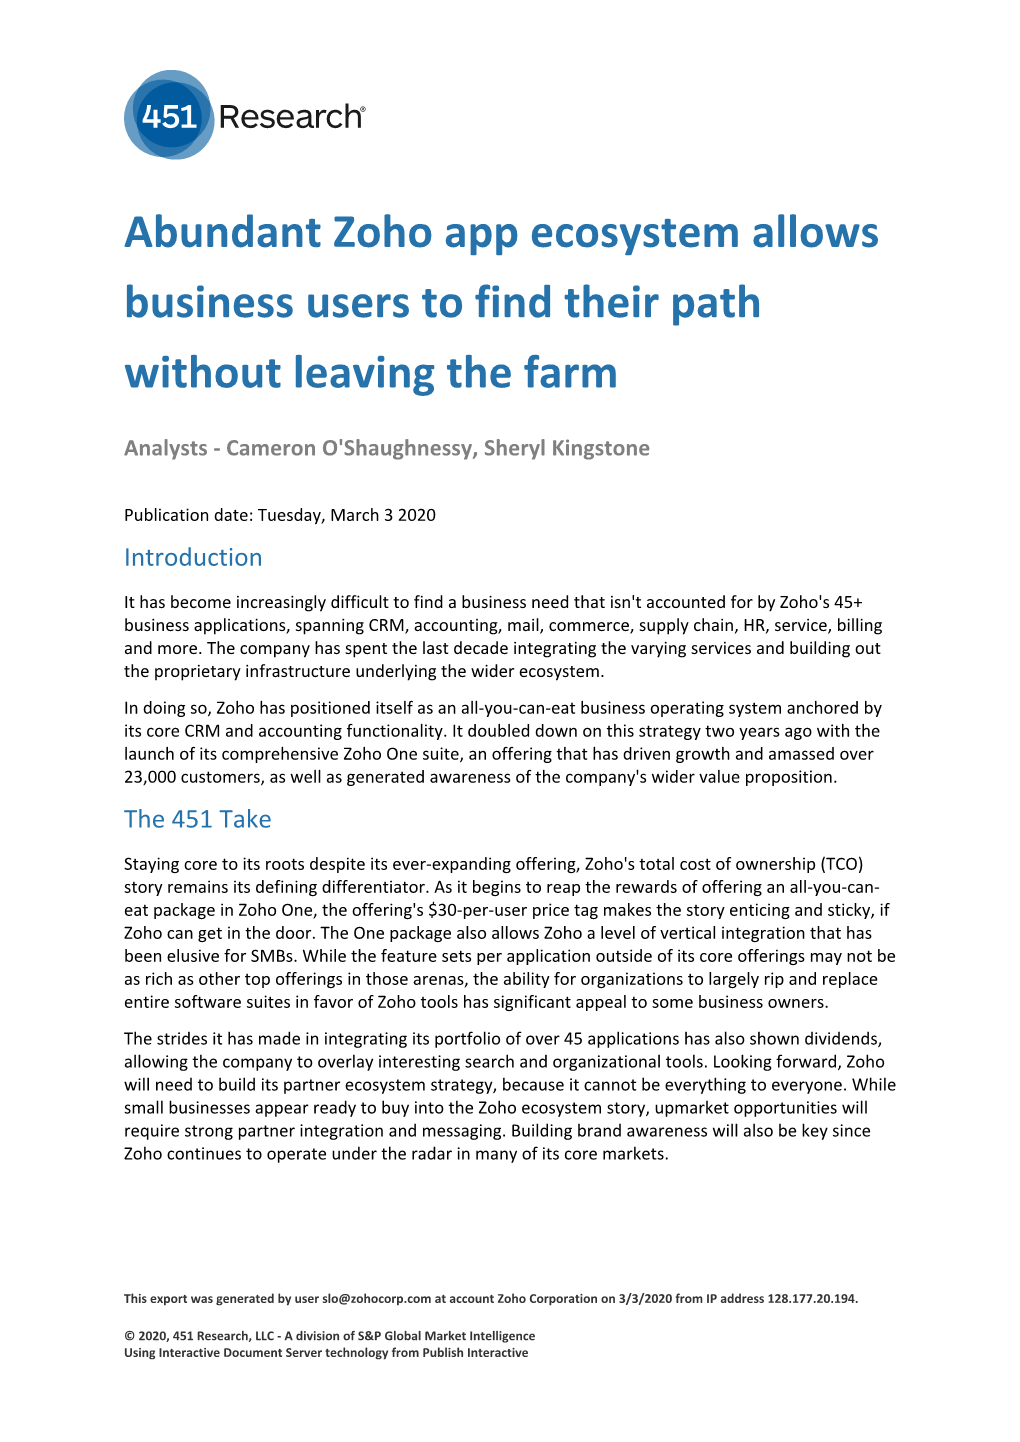 Abundant Zoho App Ecosystem Allows Business Users to Find Their Path Without Leaving the Farm